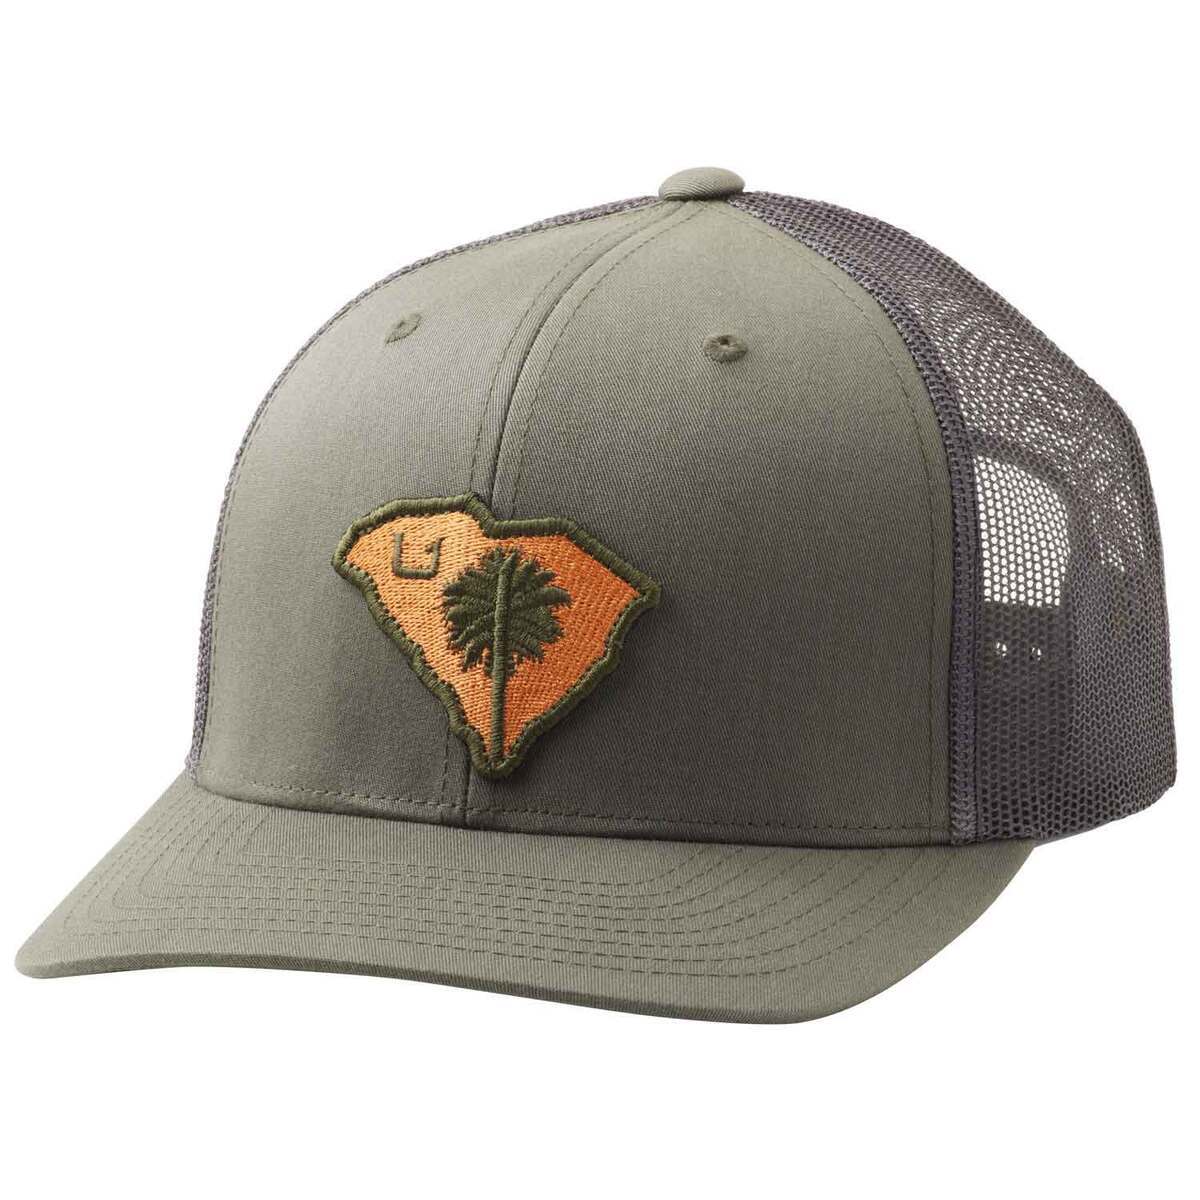 Huk Men's Palmetto State Trucker Adjustable Hat - Moss - One Size Fits ...